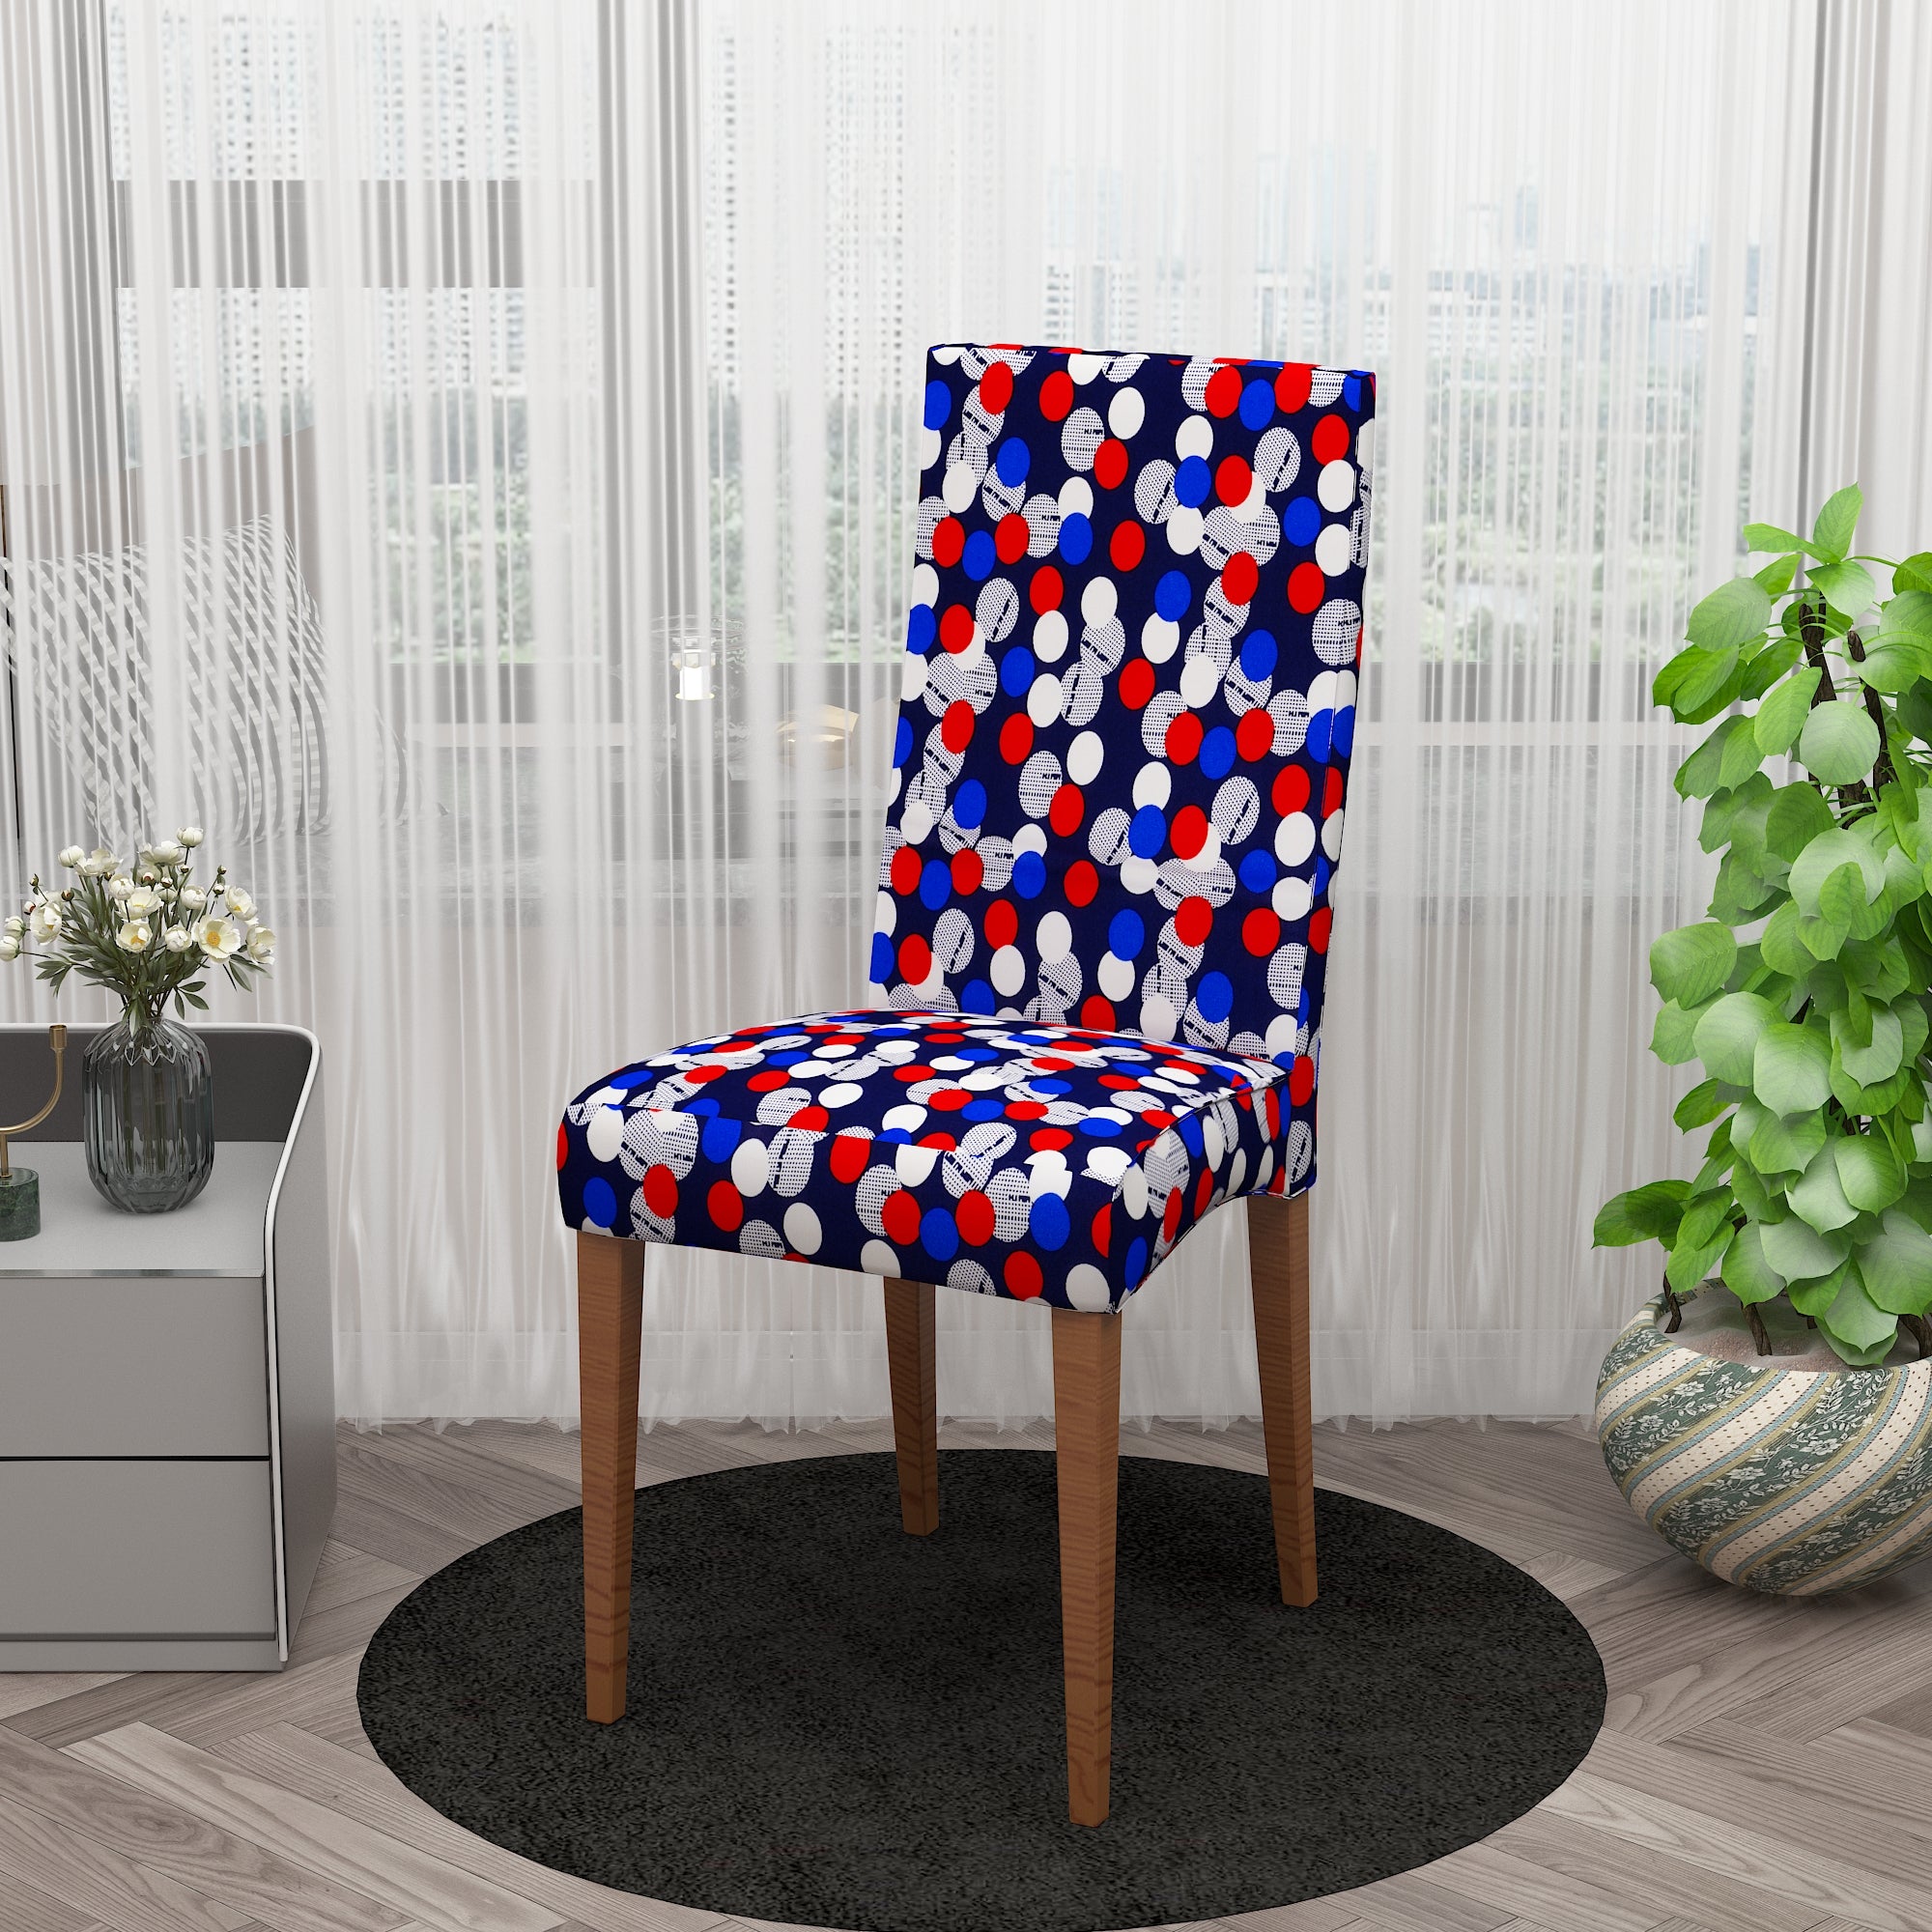 Polyester Spandex Stretchable Printed Chair Cover, MG20